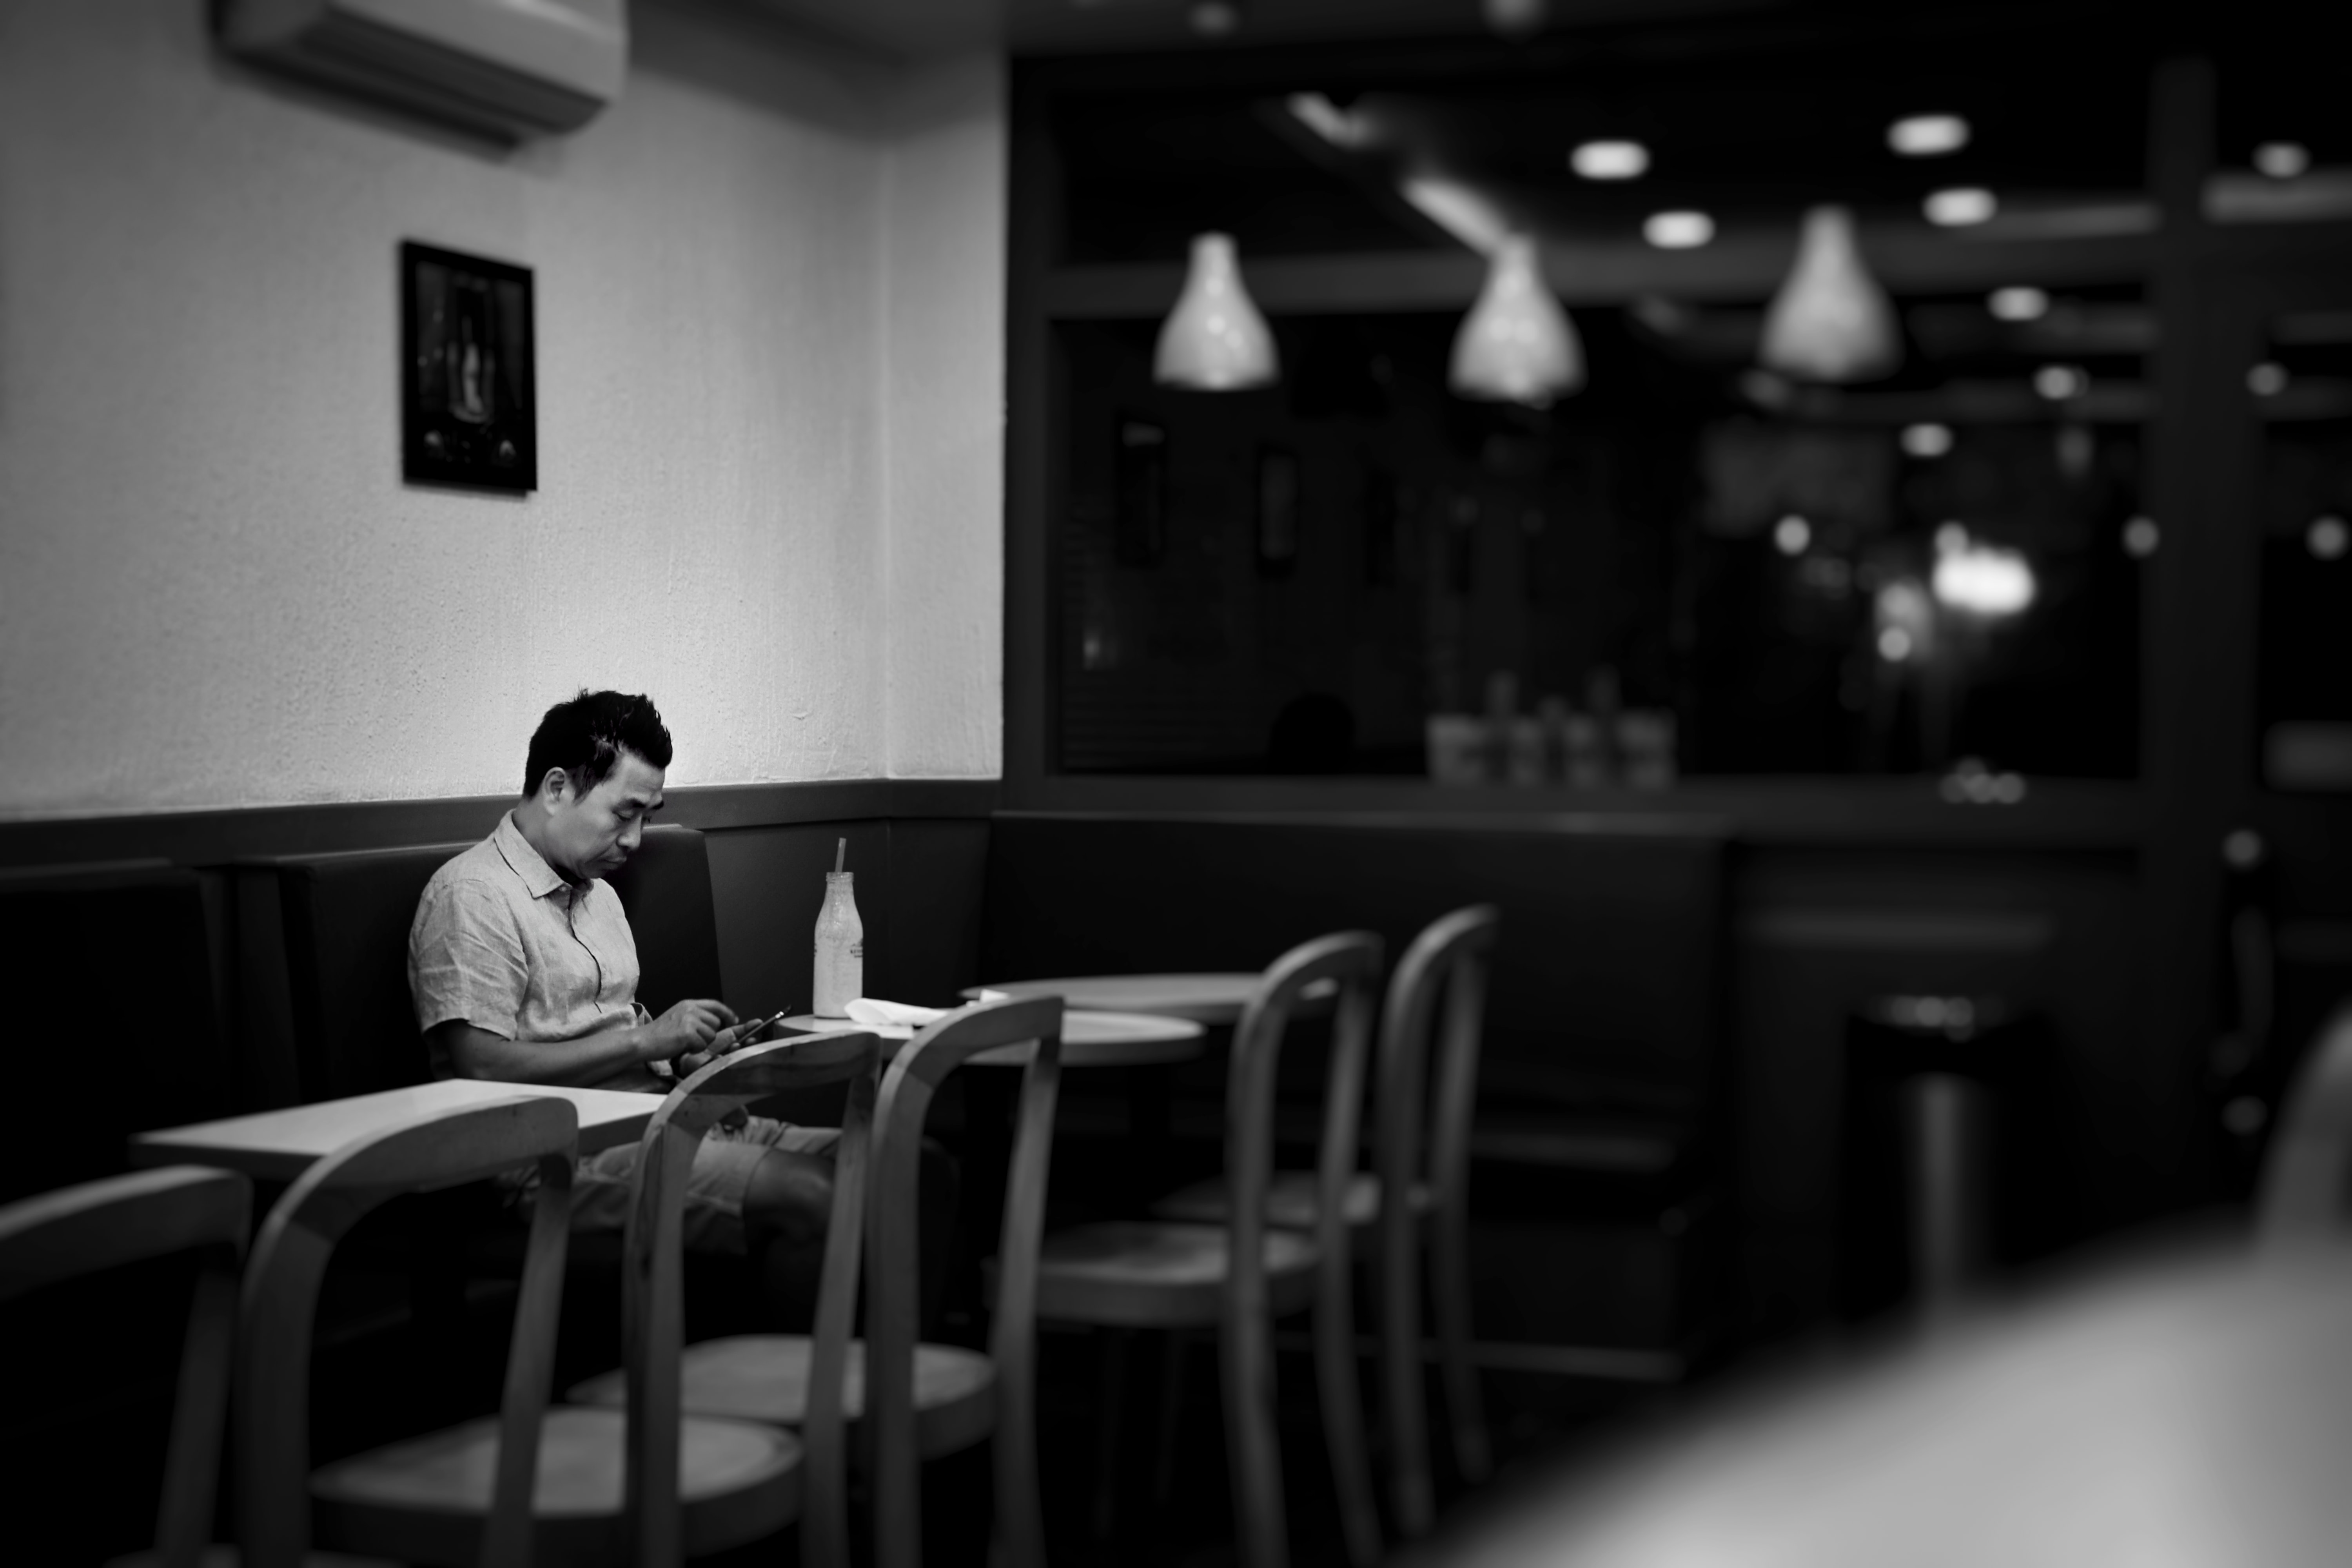 Man waits for his takeaway in a restaurant | Photo: Unsplash